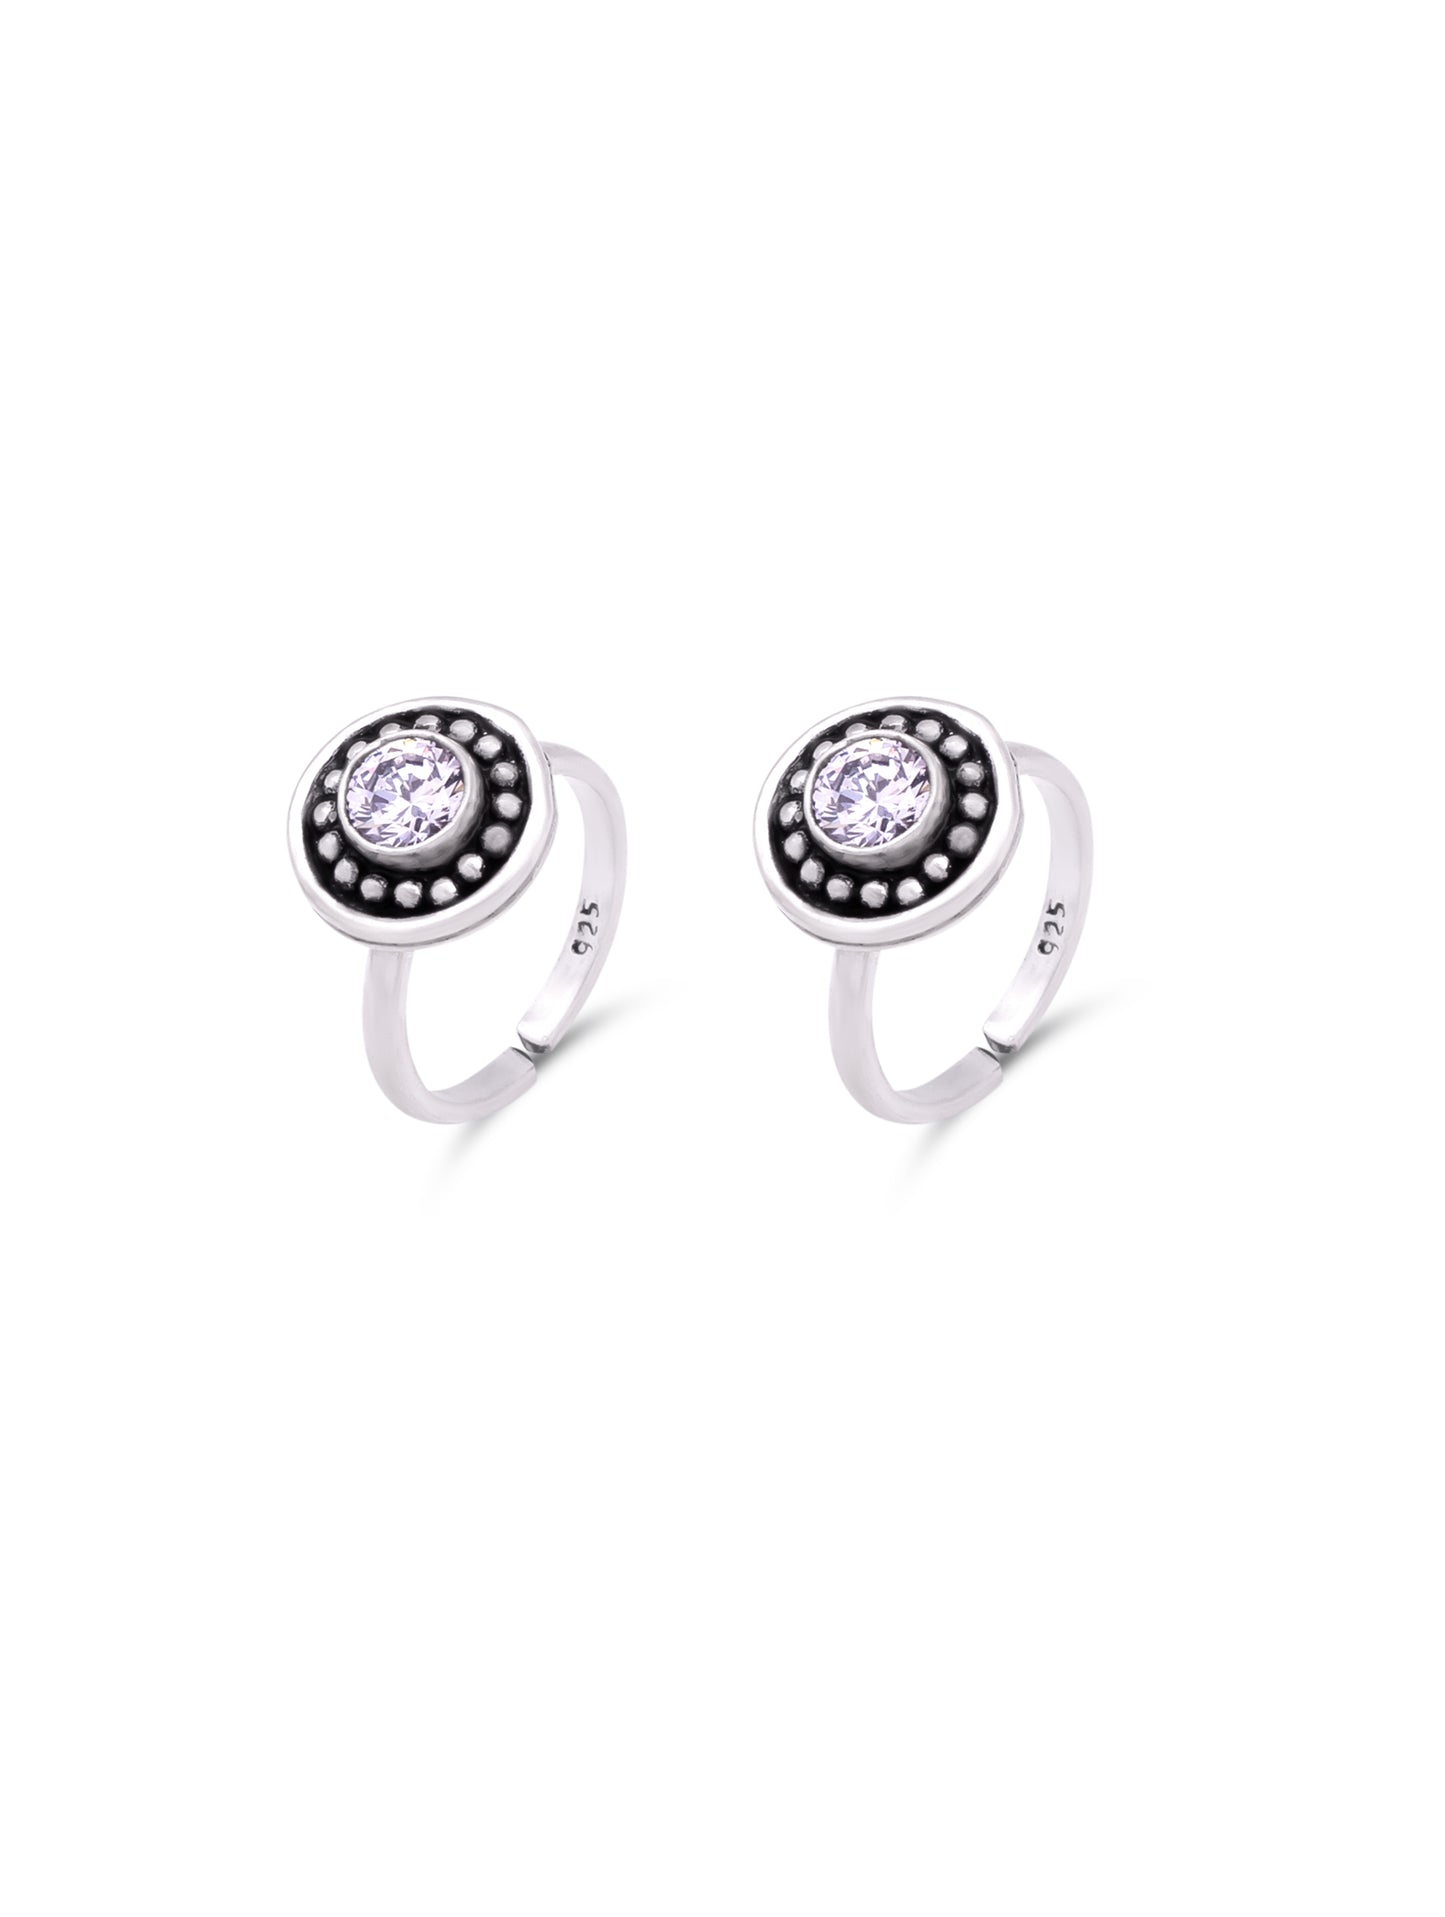 TOE RING (STYLE 1305)